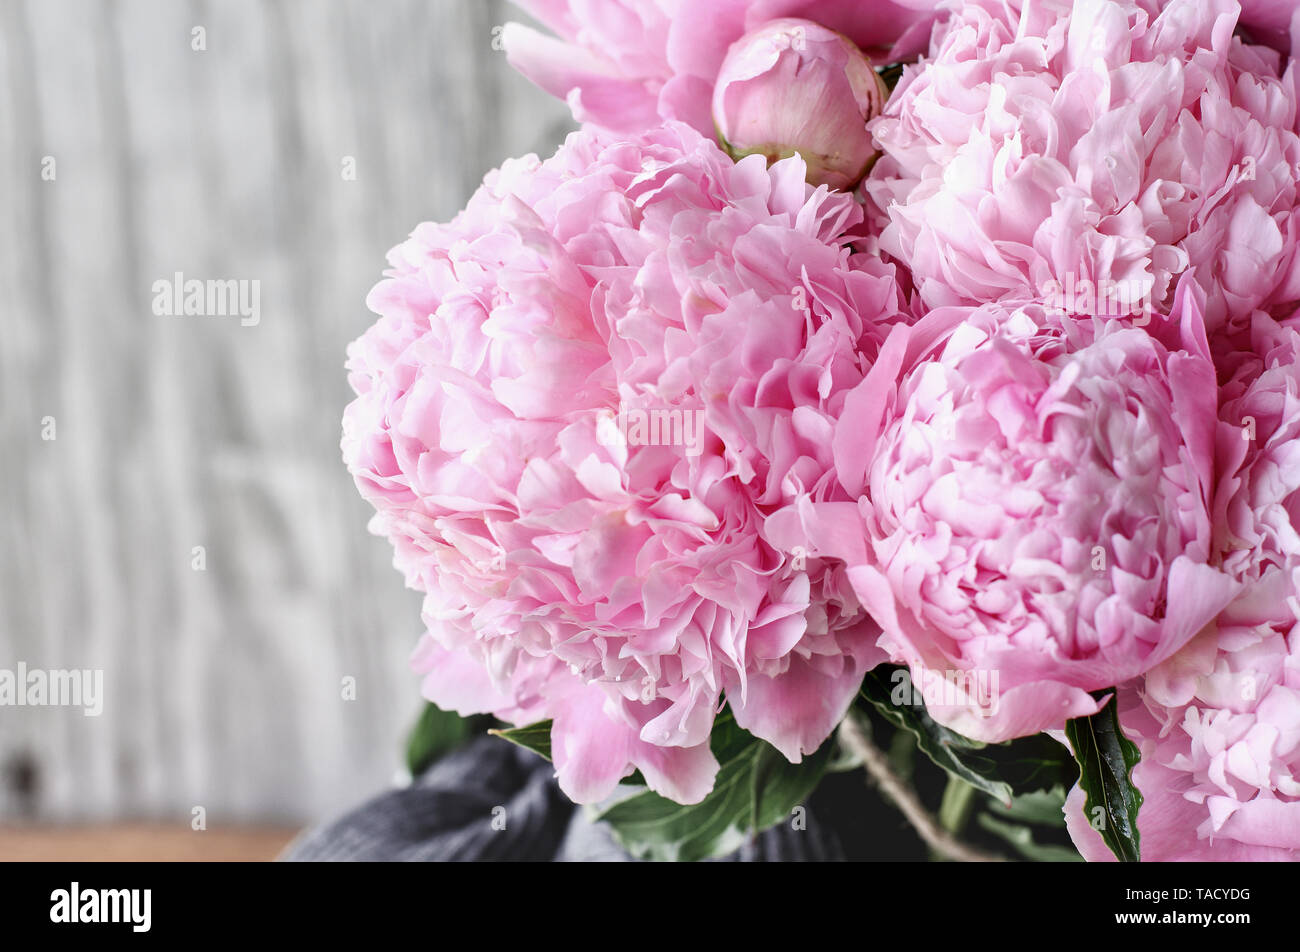 Bouquet of pink Peony flowers against a white rustic wood background  with copy space for your text. Stock Photo